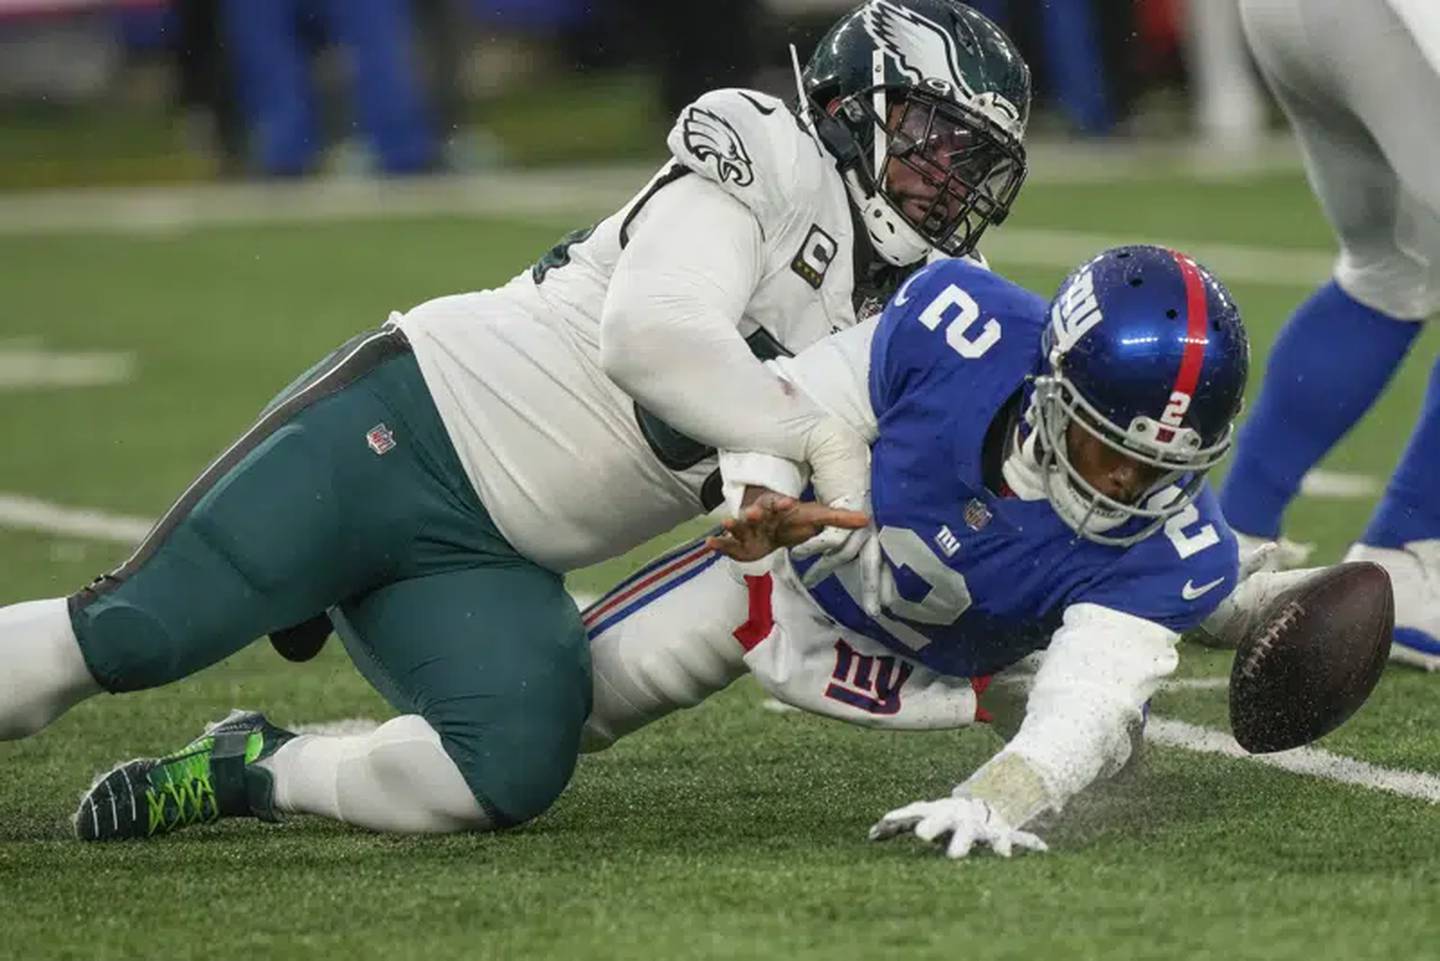 Eagles defensive end Brandon Graham, left, forces a fumble by Giants quarterback Tyrod Taylor during the fourth quarter Sunday in East Rutherford, N.J.